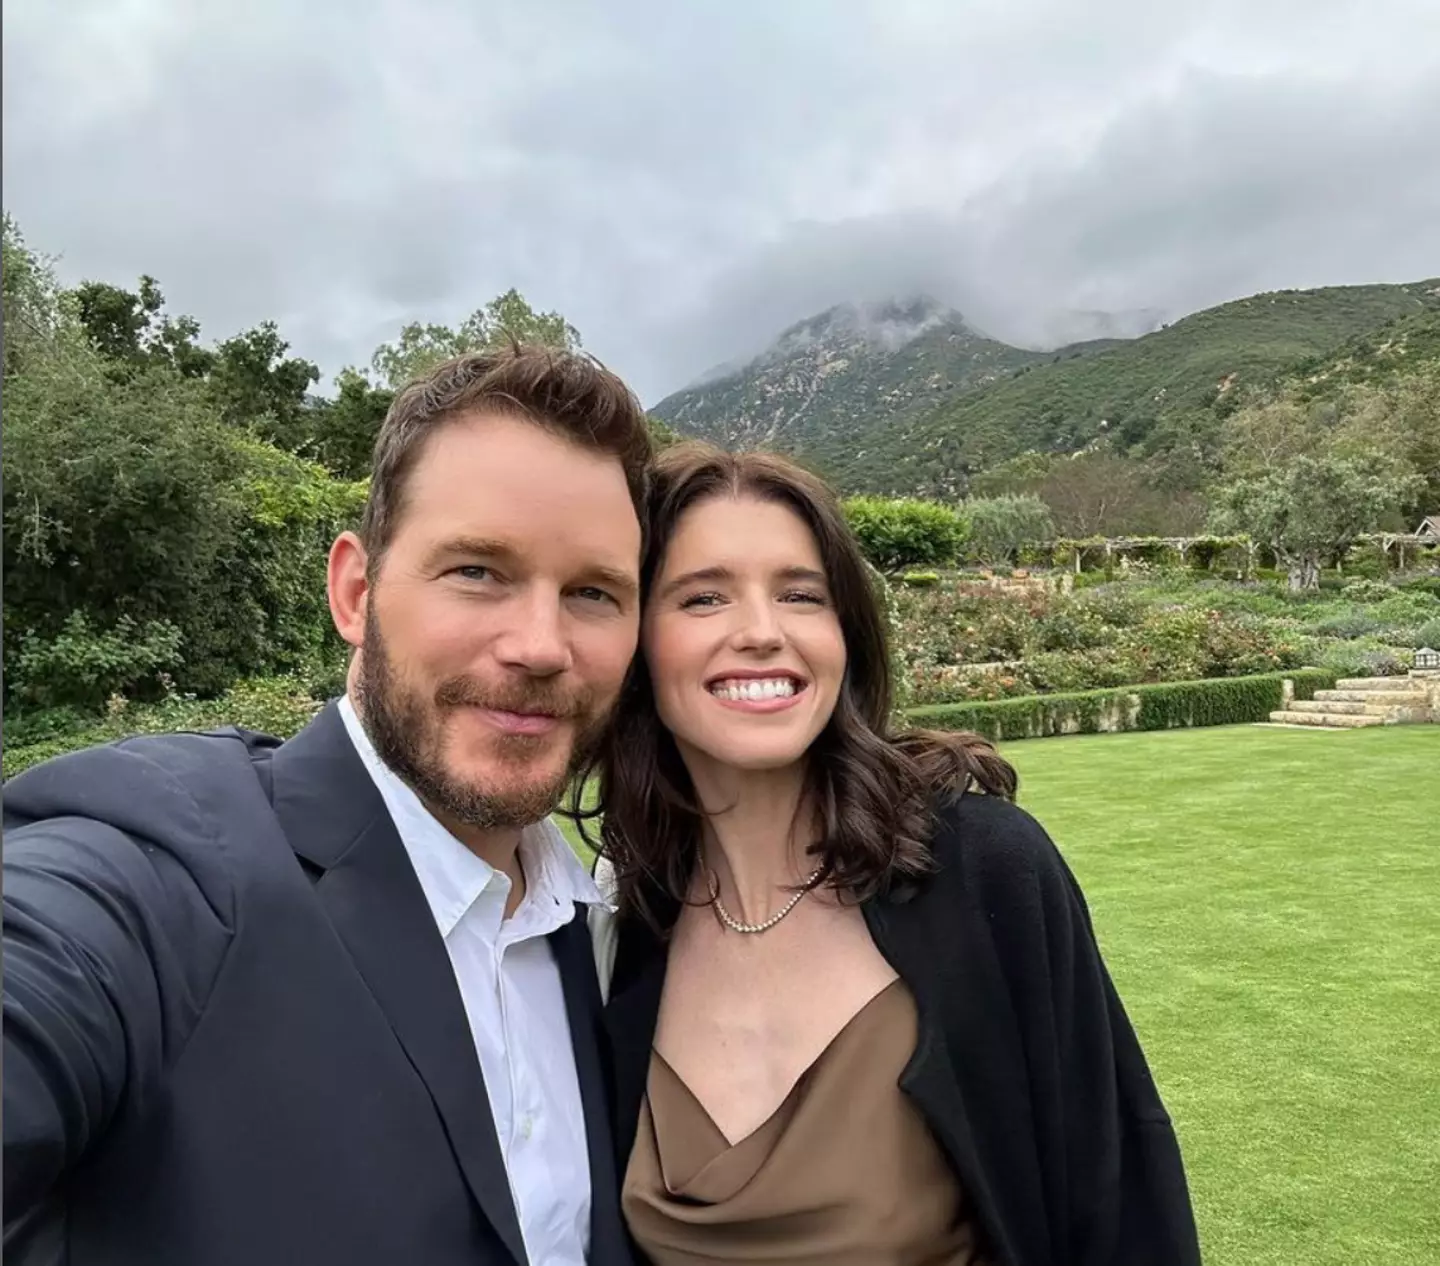 Chris Pratt shares his two young daughters with wife Katherine Schwarzenegger.